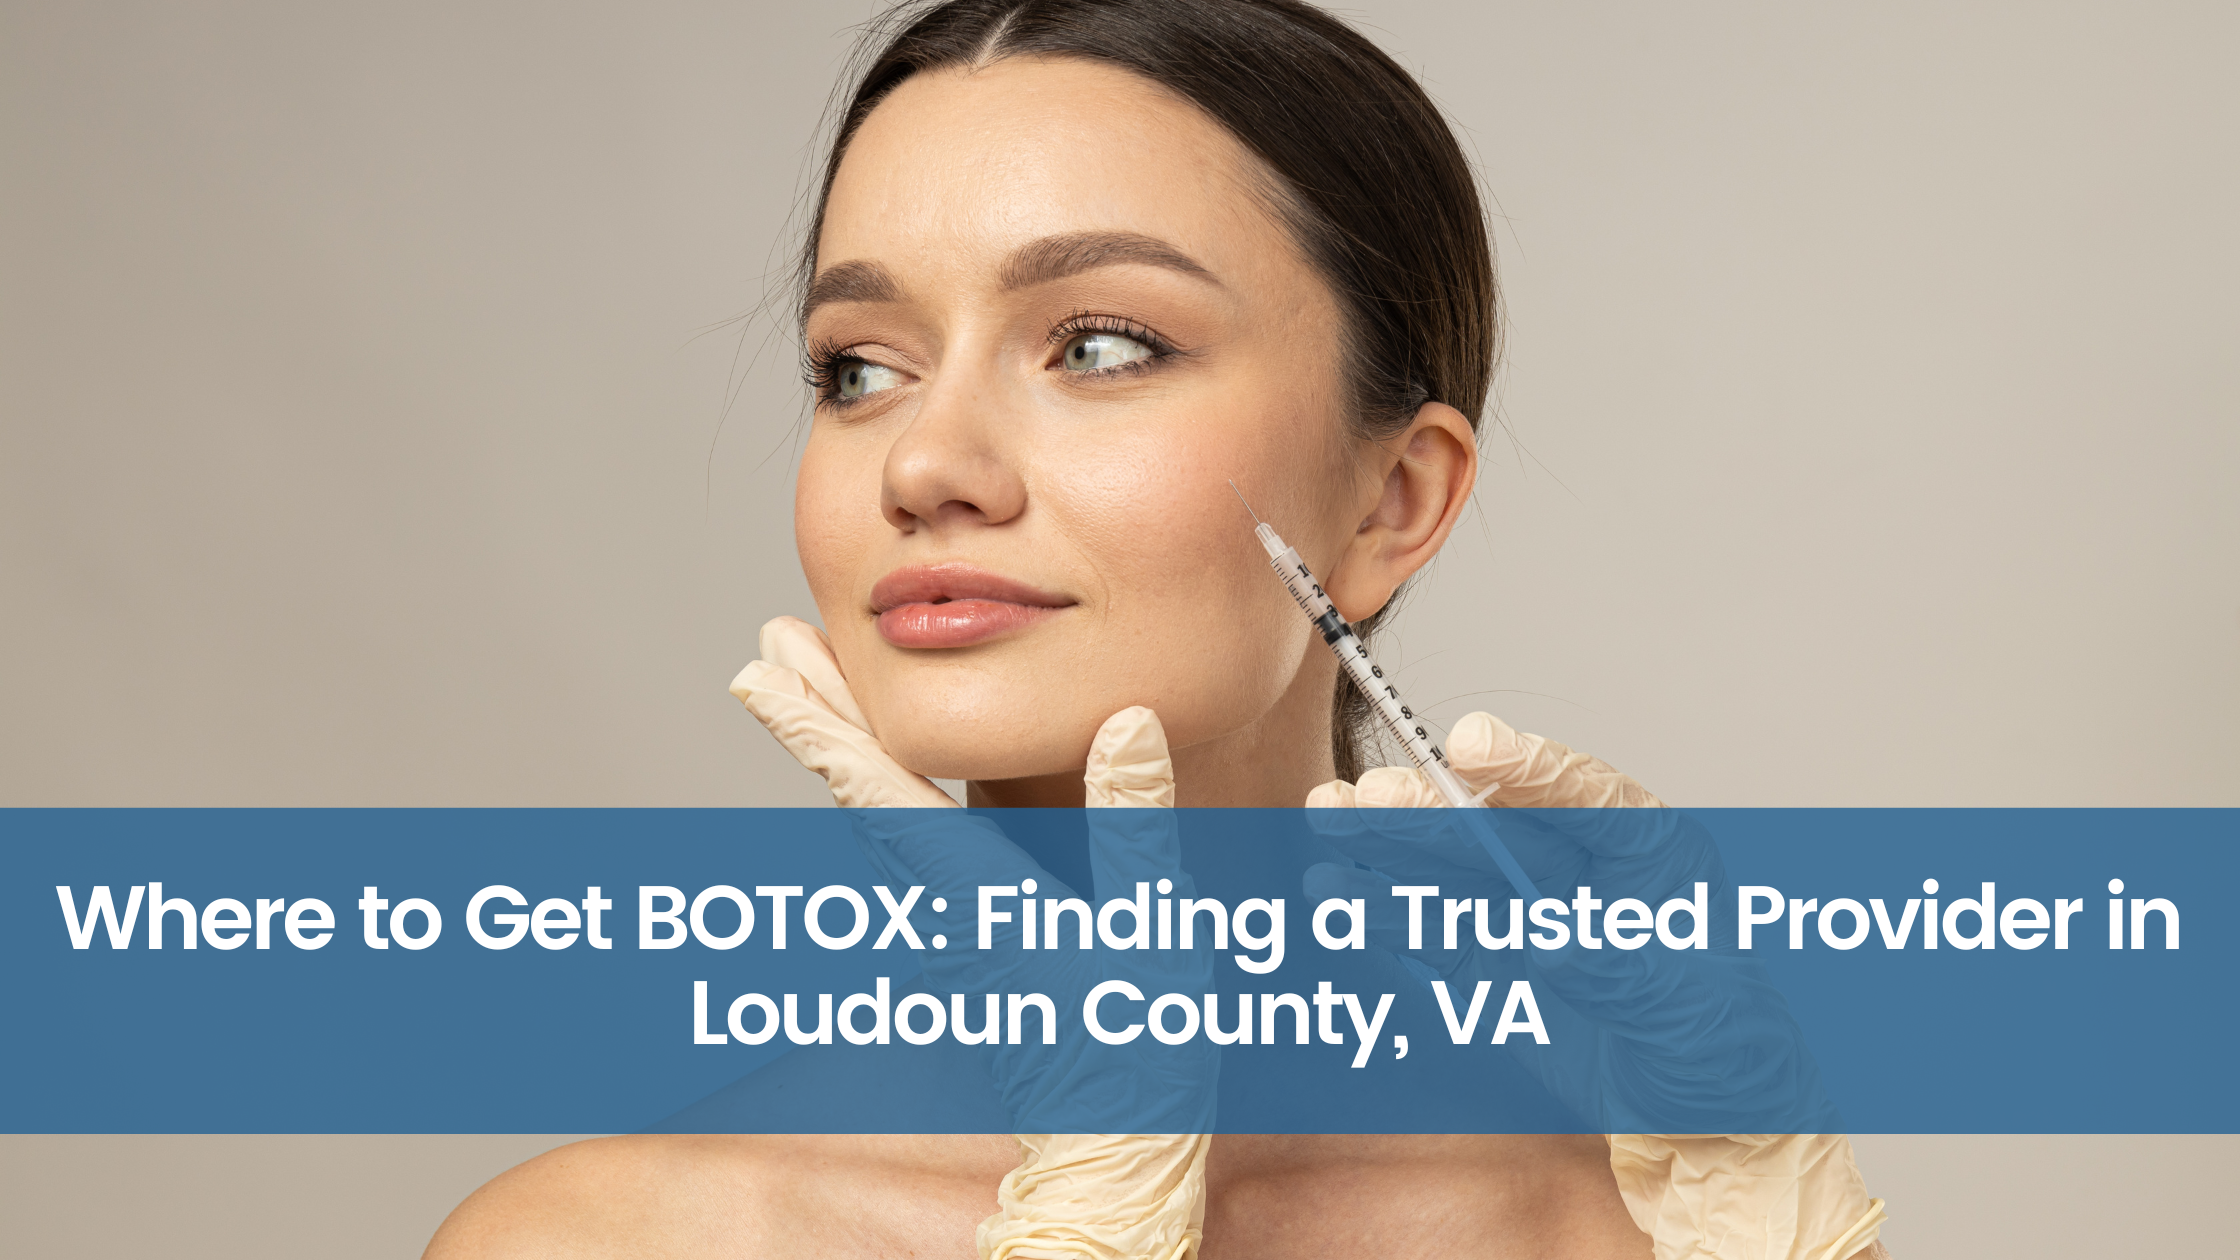 Where to Get BOTOX: Finding a Trusted Provider in Loudoun County, VA